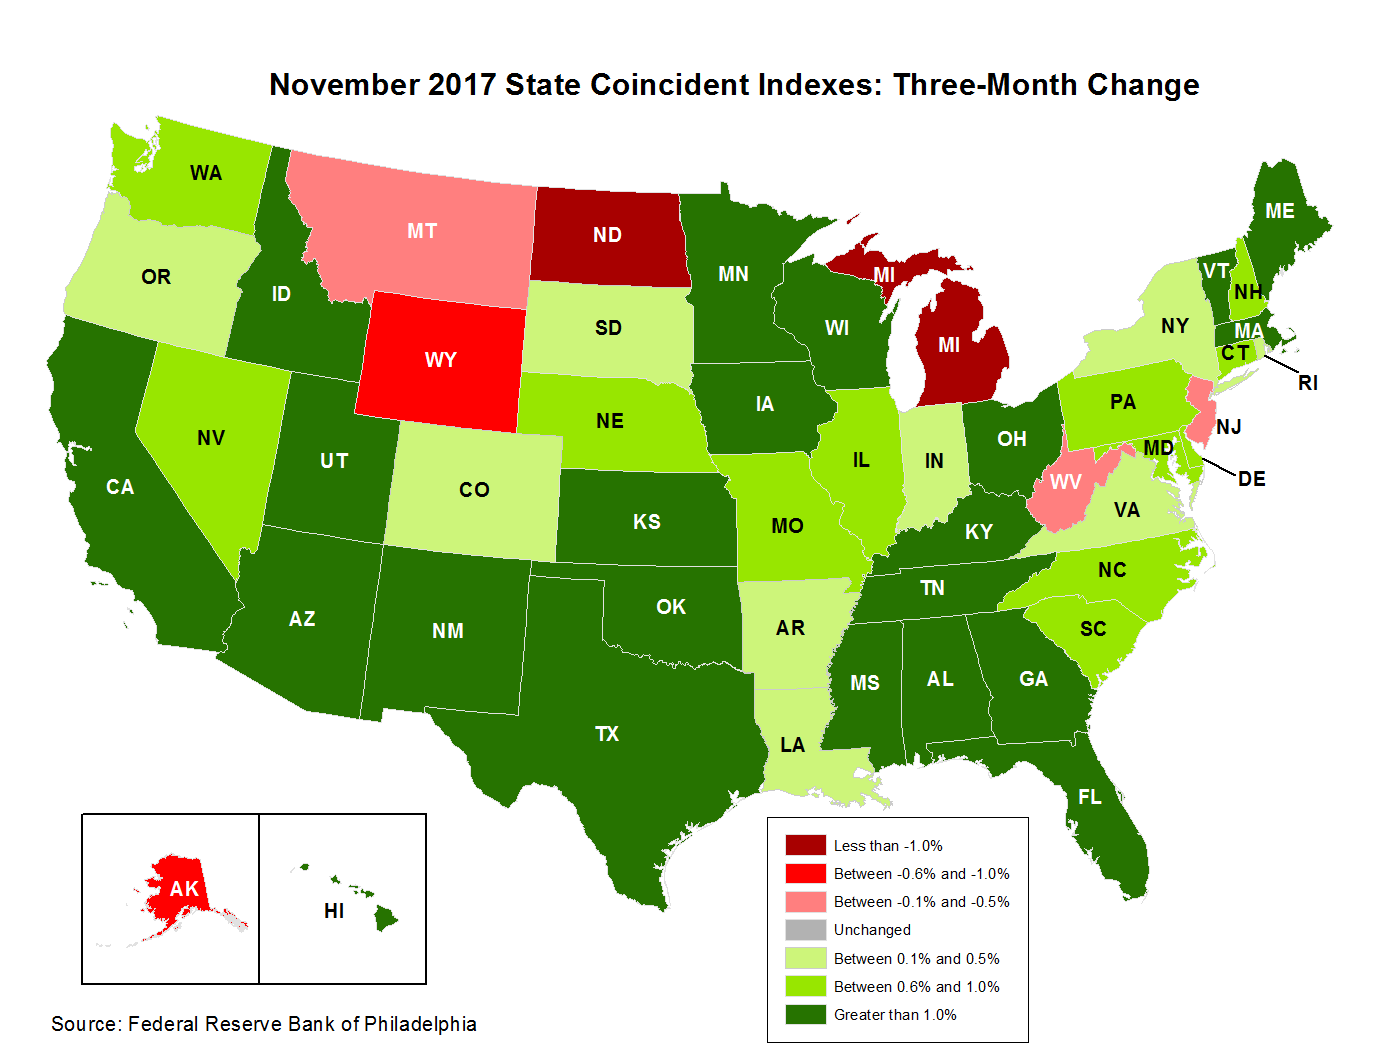 Map of the U.S. showing the State Coincident Indexes Three-Month Change in November 2017